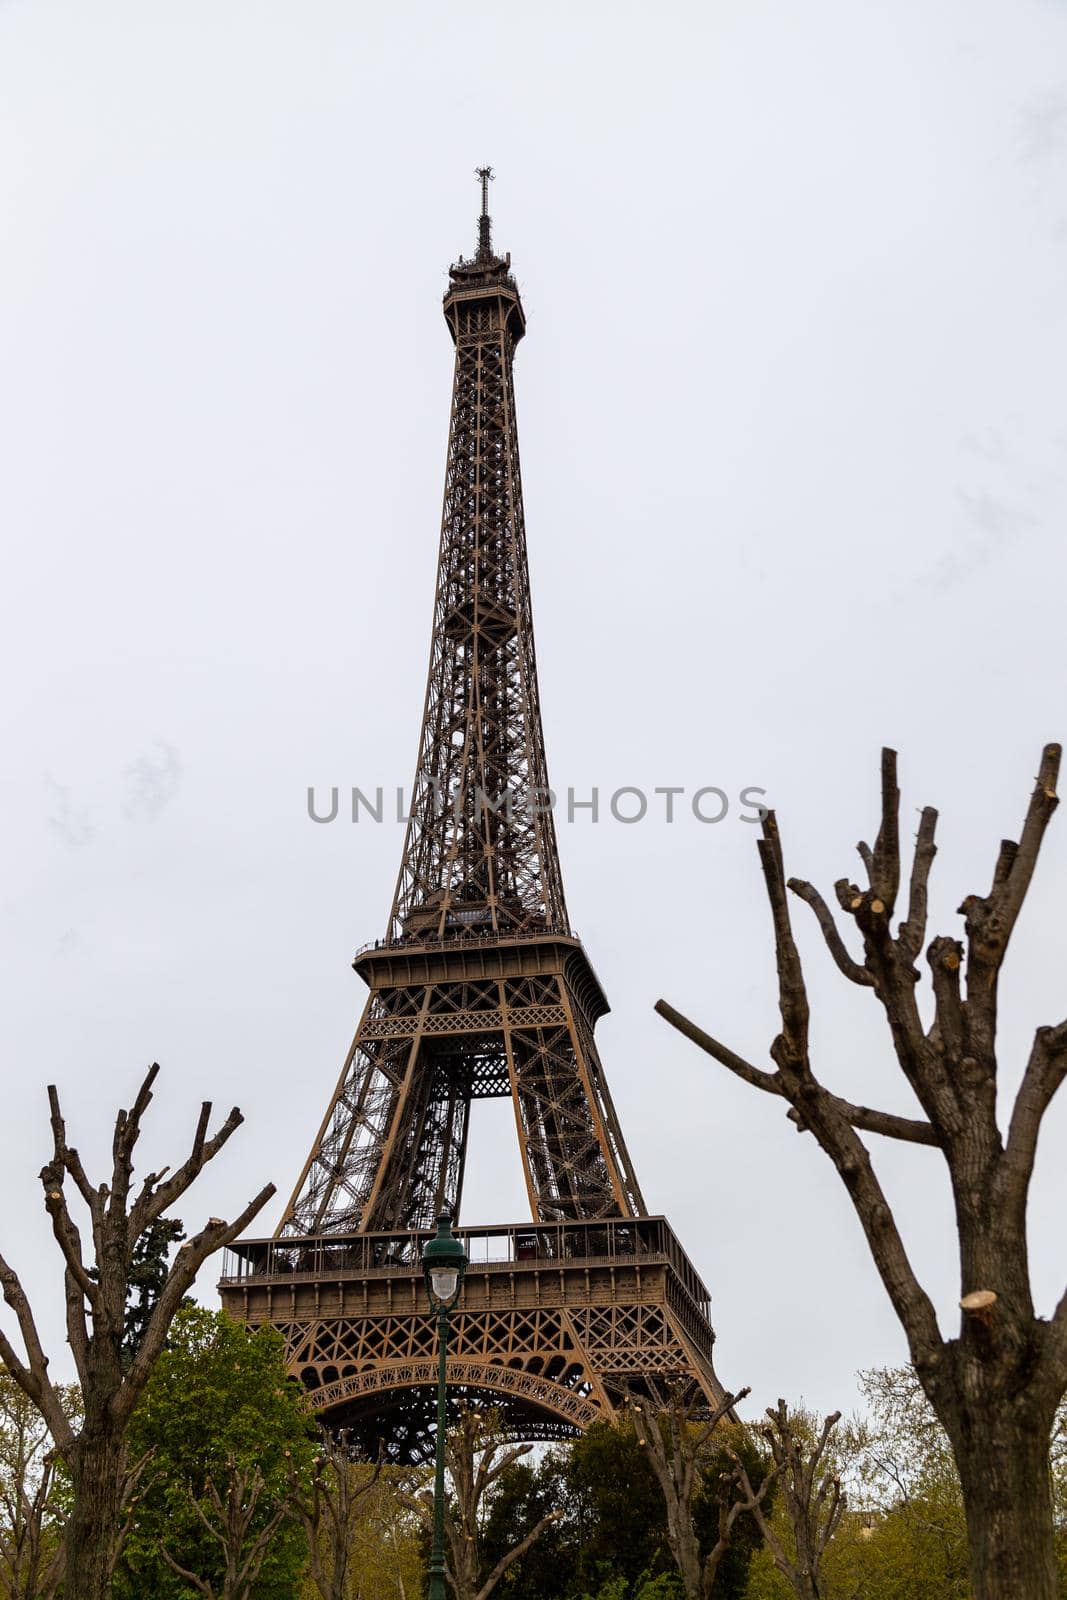 View at Eiffel Tower in Paris, France with trees in the foreground